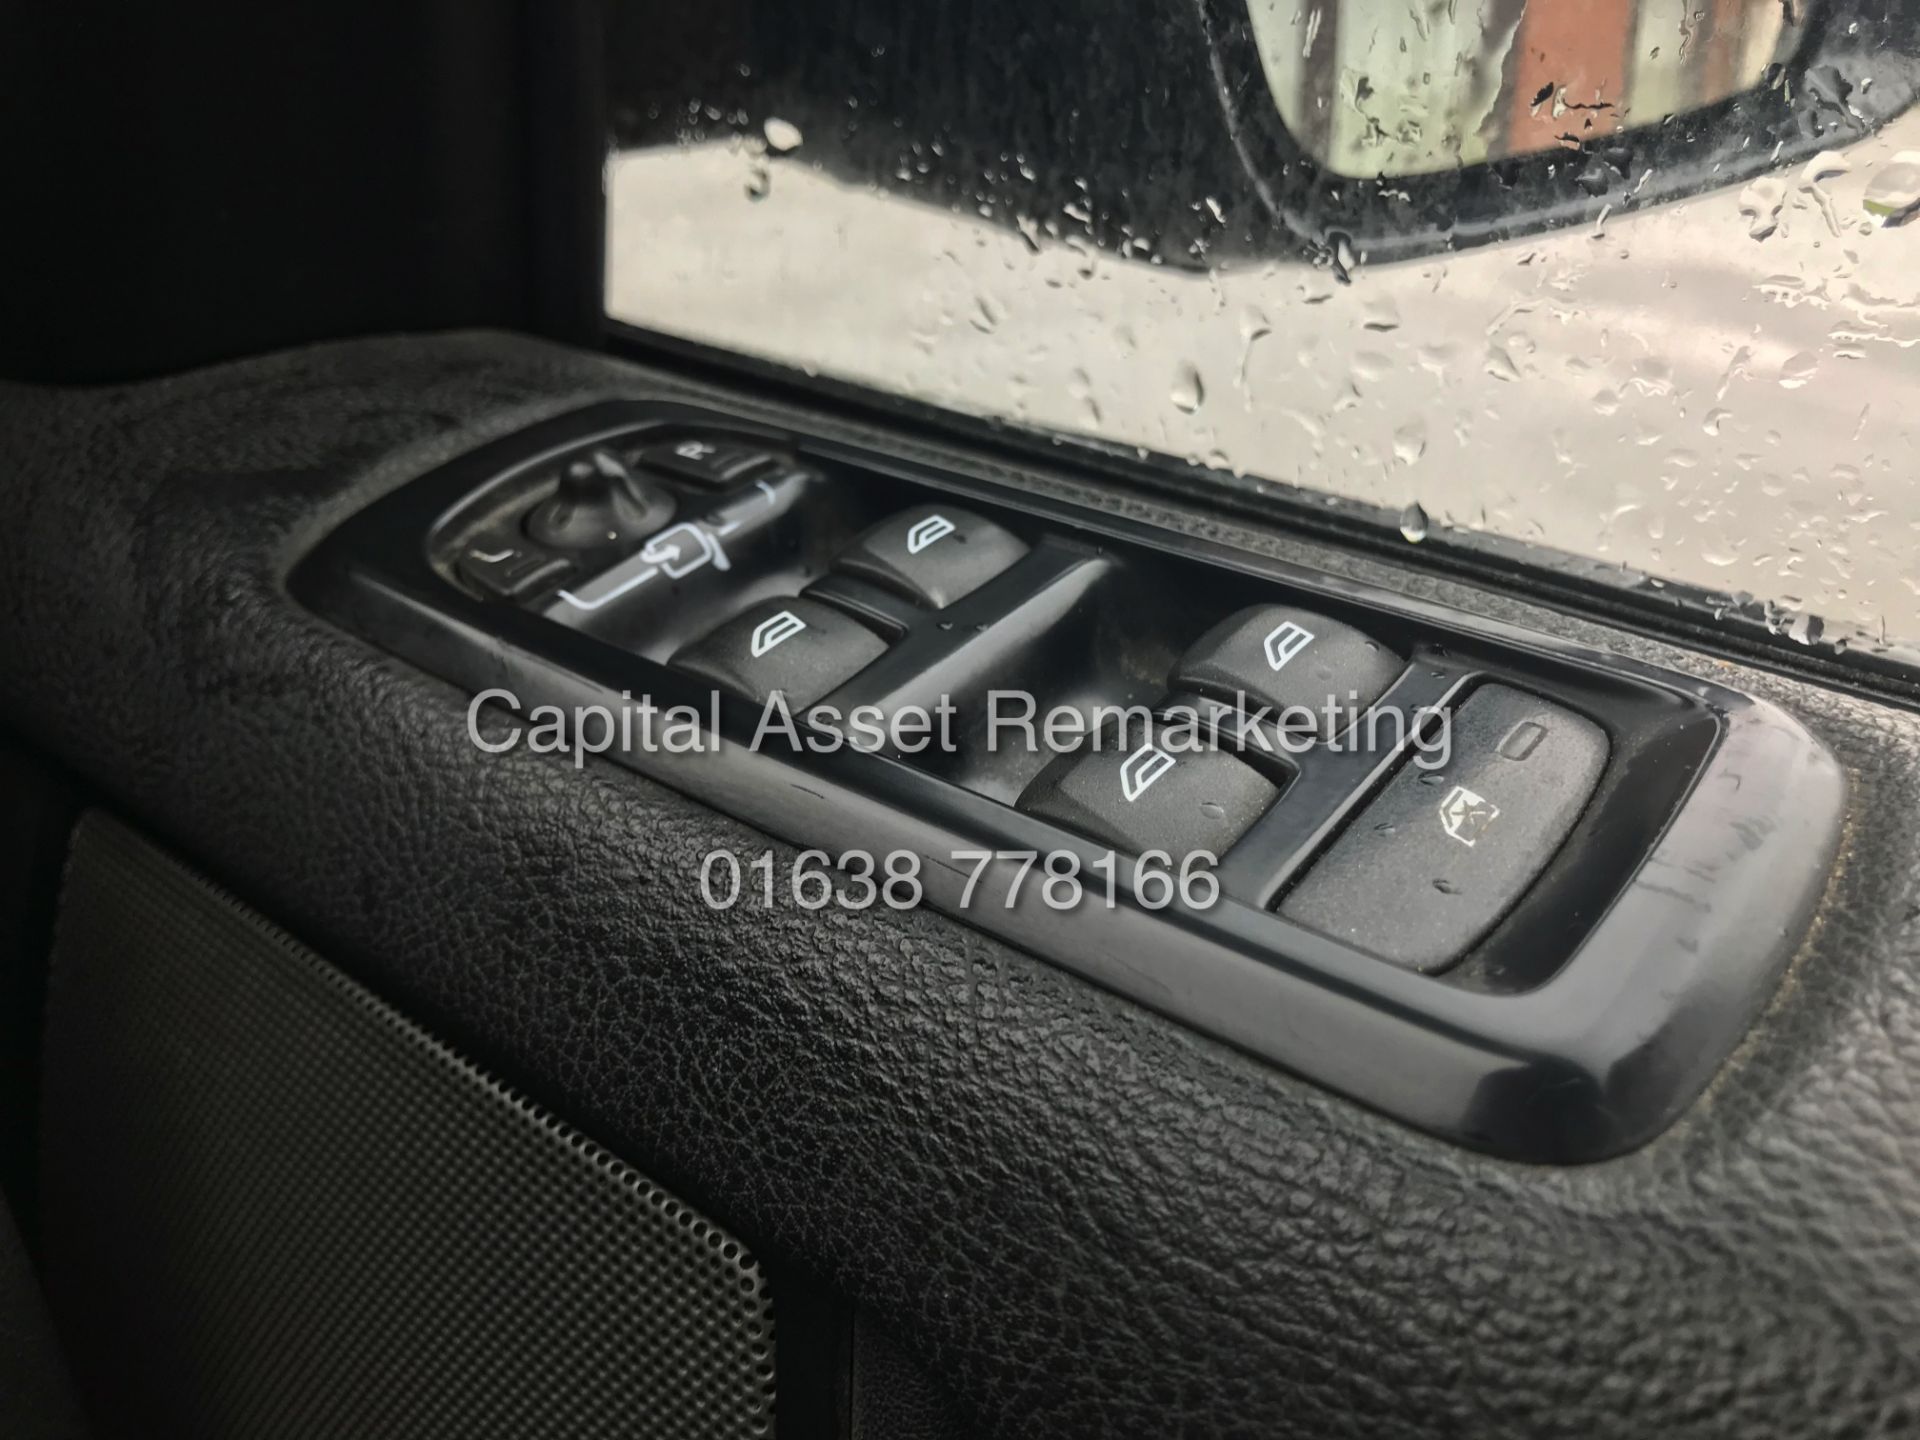 LAND ROVER DISCOVERY 4 *SE EDITION* (2016) '3.0 SDV6 - 8 SPEED AUTO' *LEATHER & SAT NAV* (HUGE SPEC) - Image 22 of 24